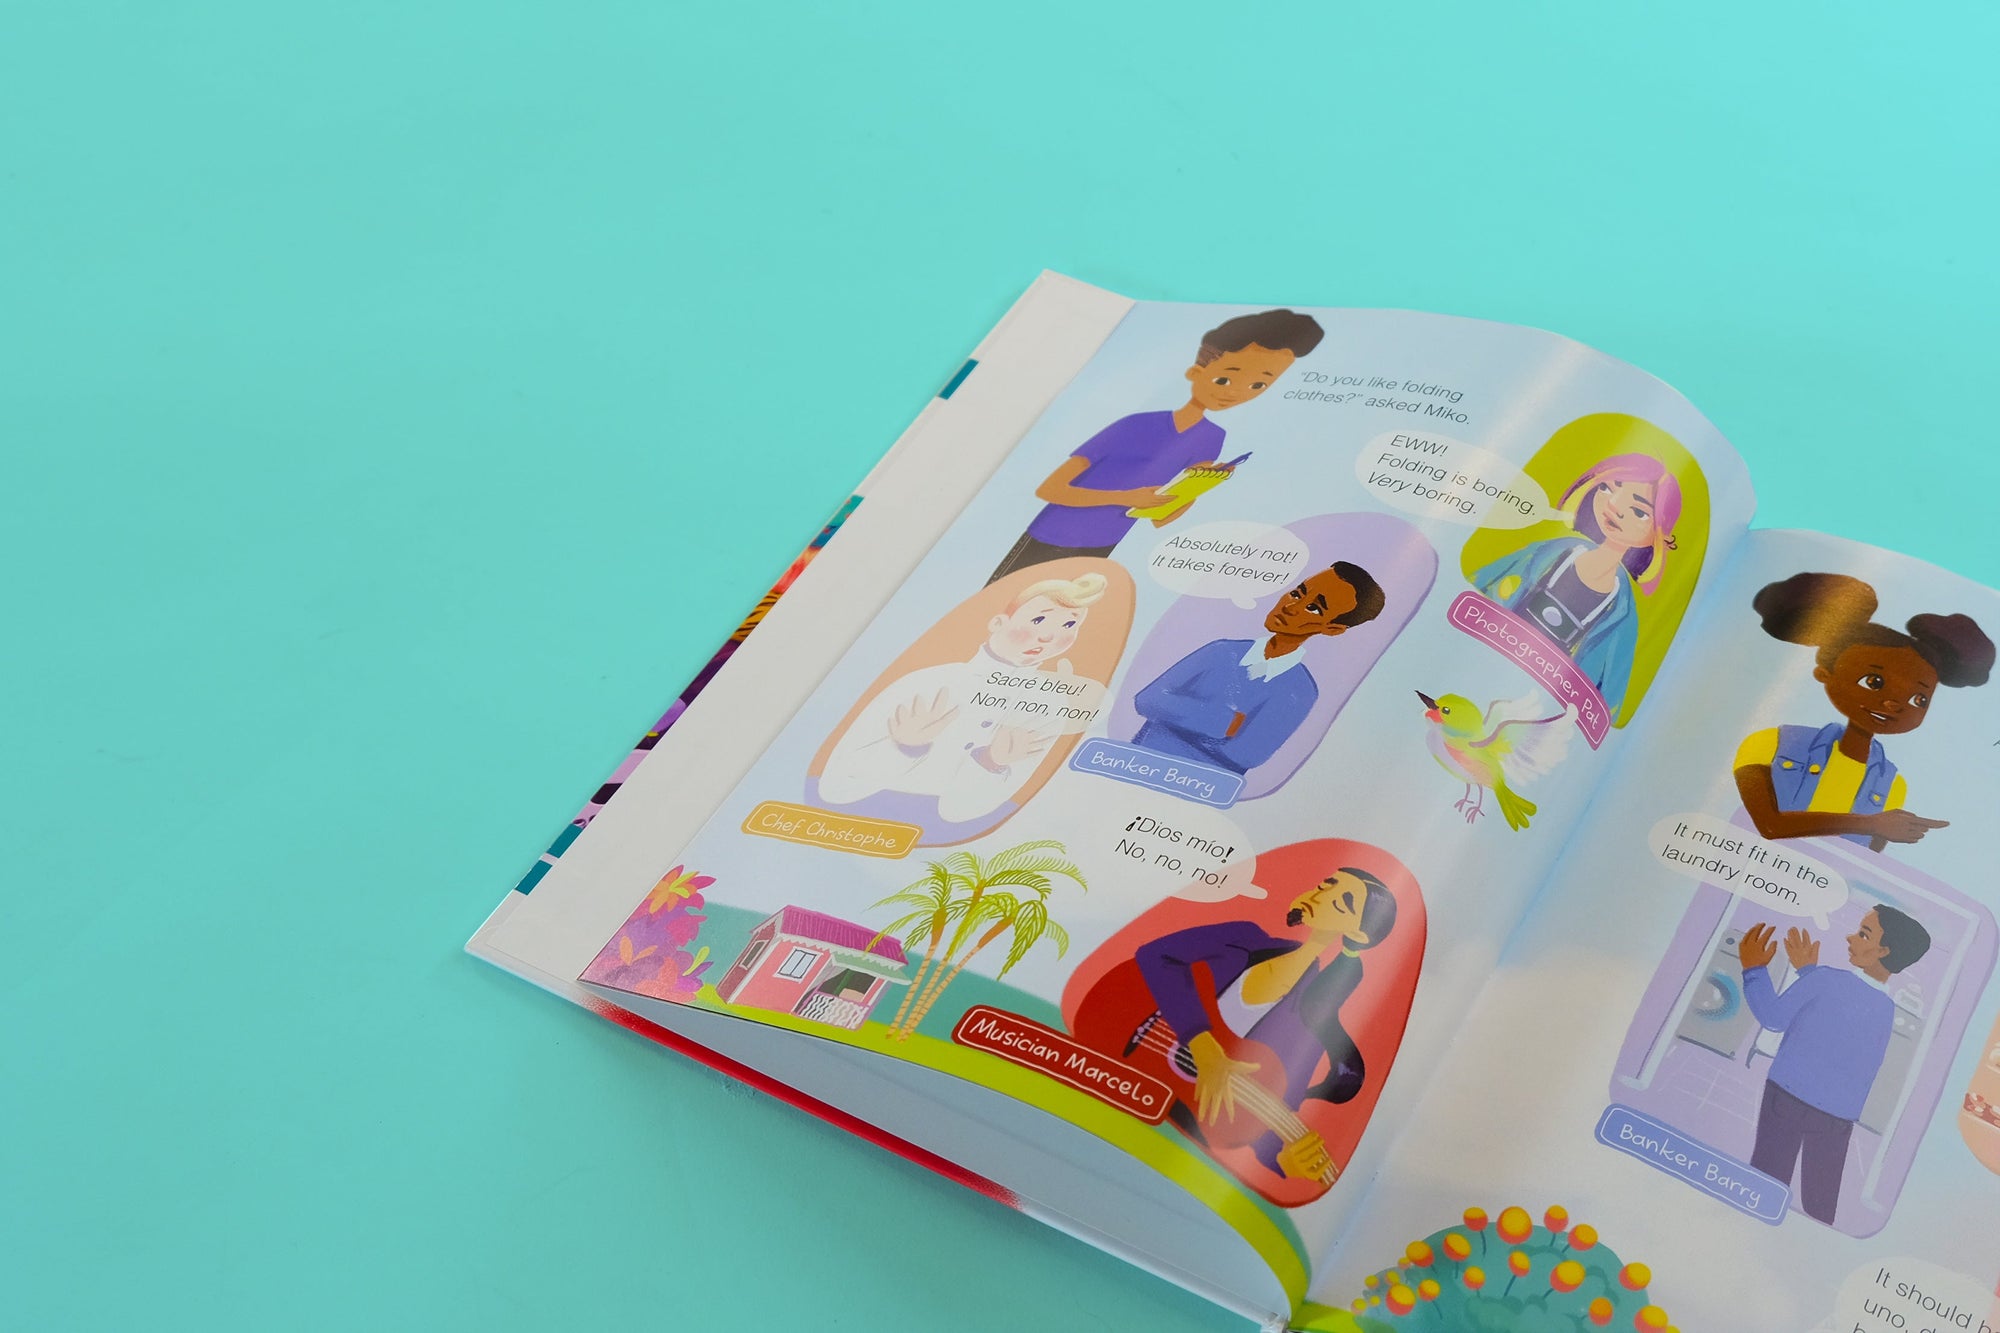 Abby Invents The Foldibot (SIGNED!) - Diverse Kids STEM Books & Activities from SeeSoar Kids